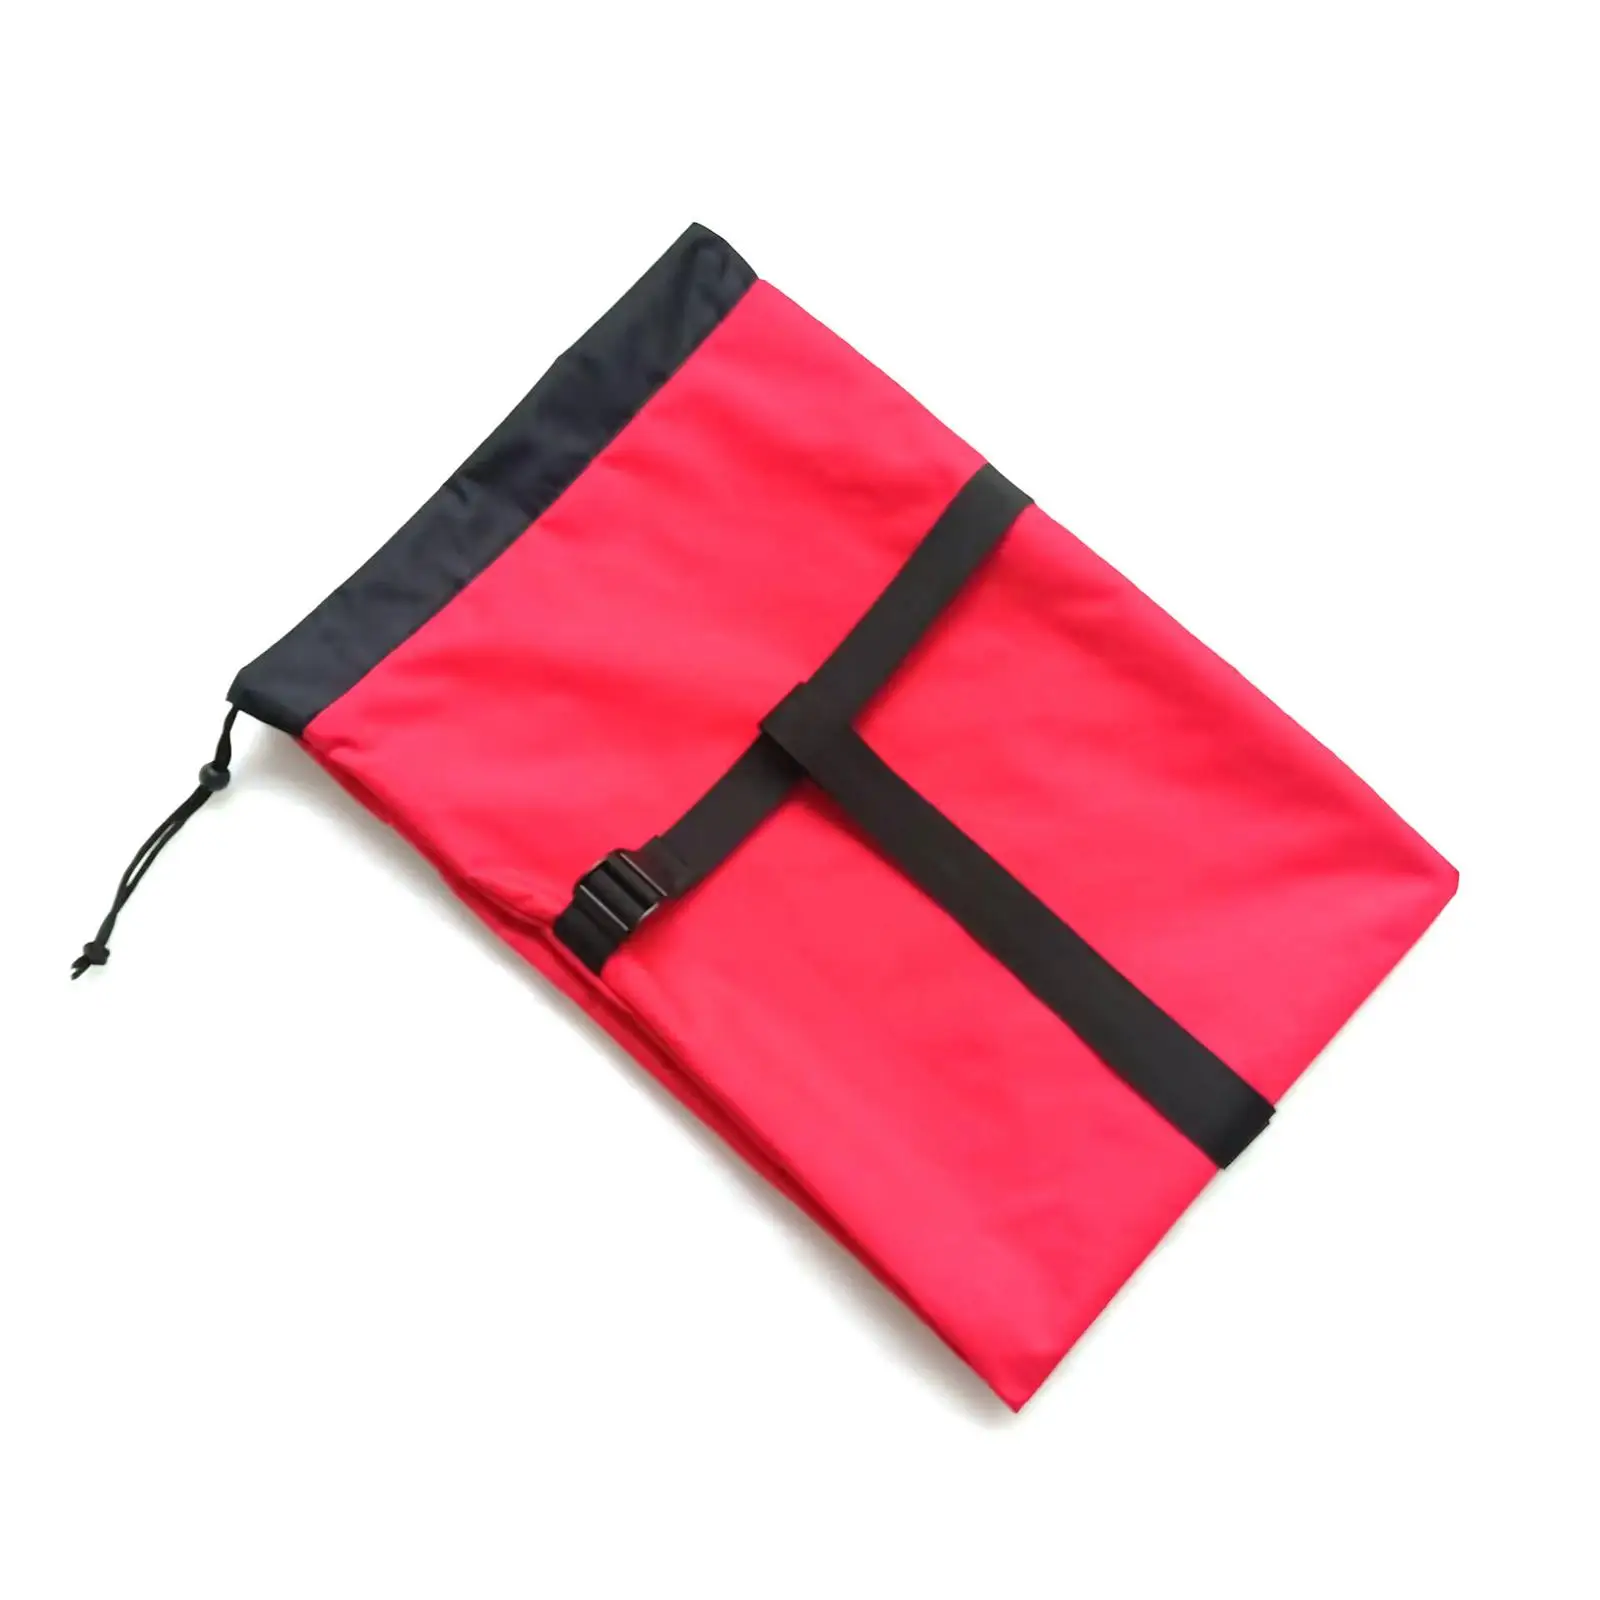 Camping Chair Replacement Bag Folding Chair Storage Bag for Outdoor Home BBQ Drawstring Opening Carry Nylon Storage Tent Bag